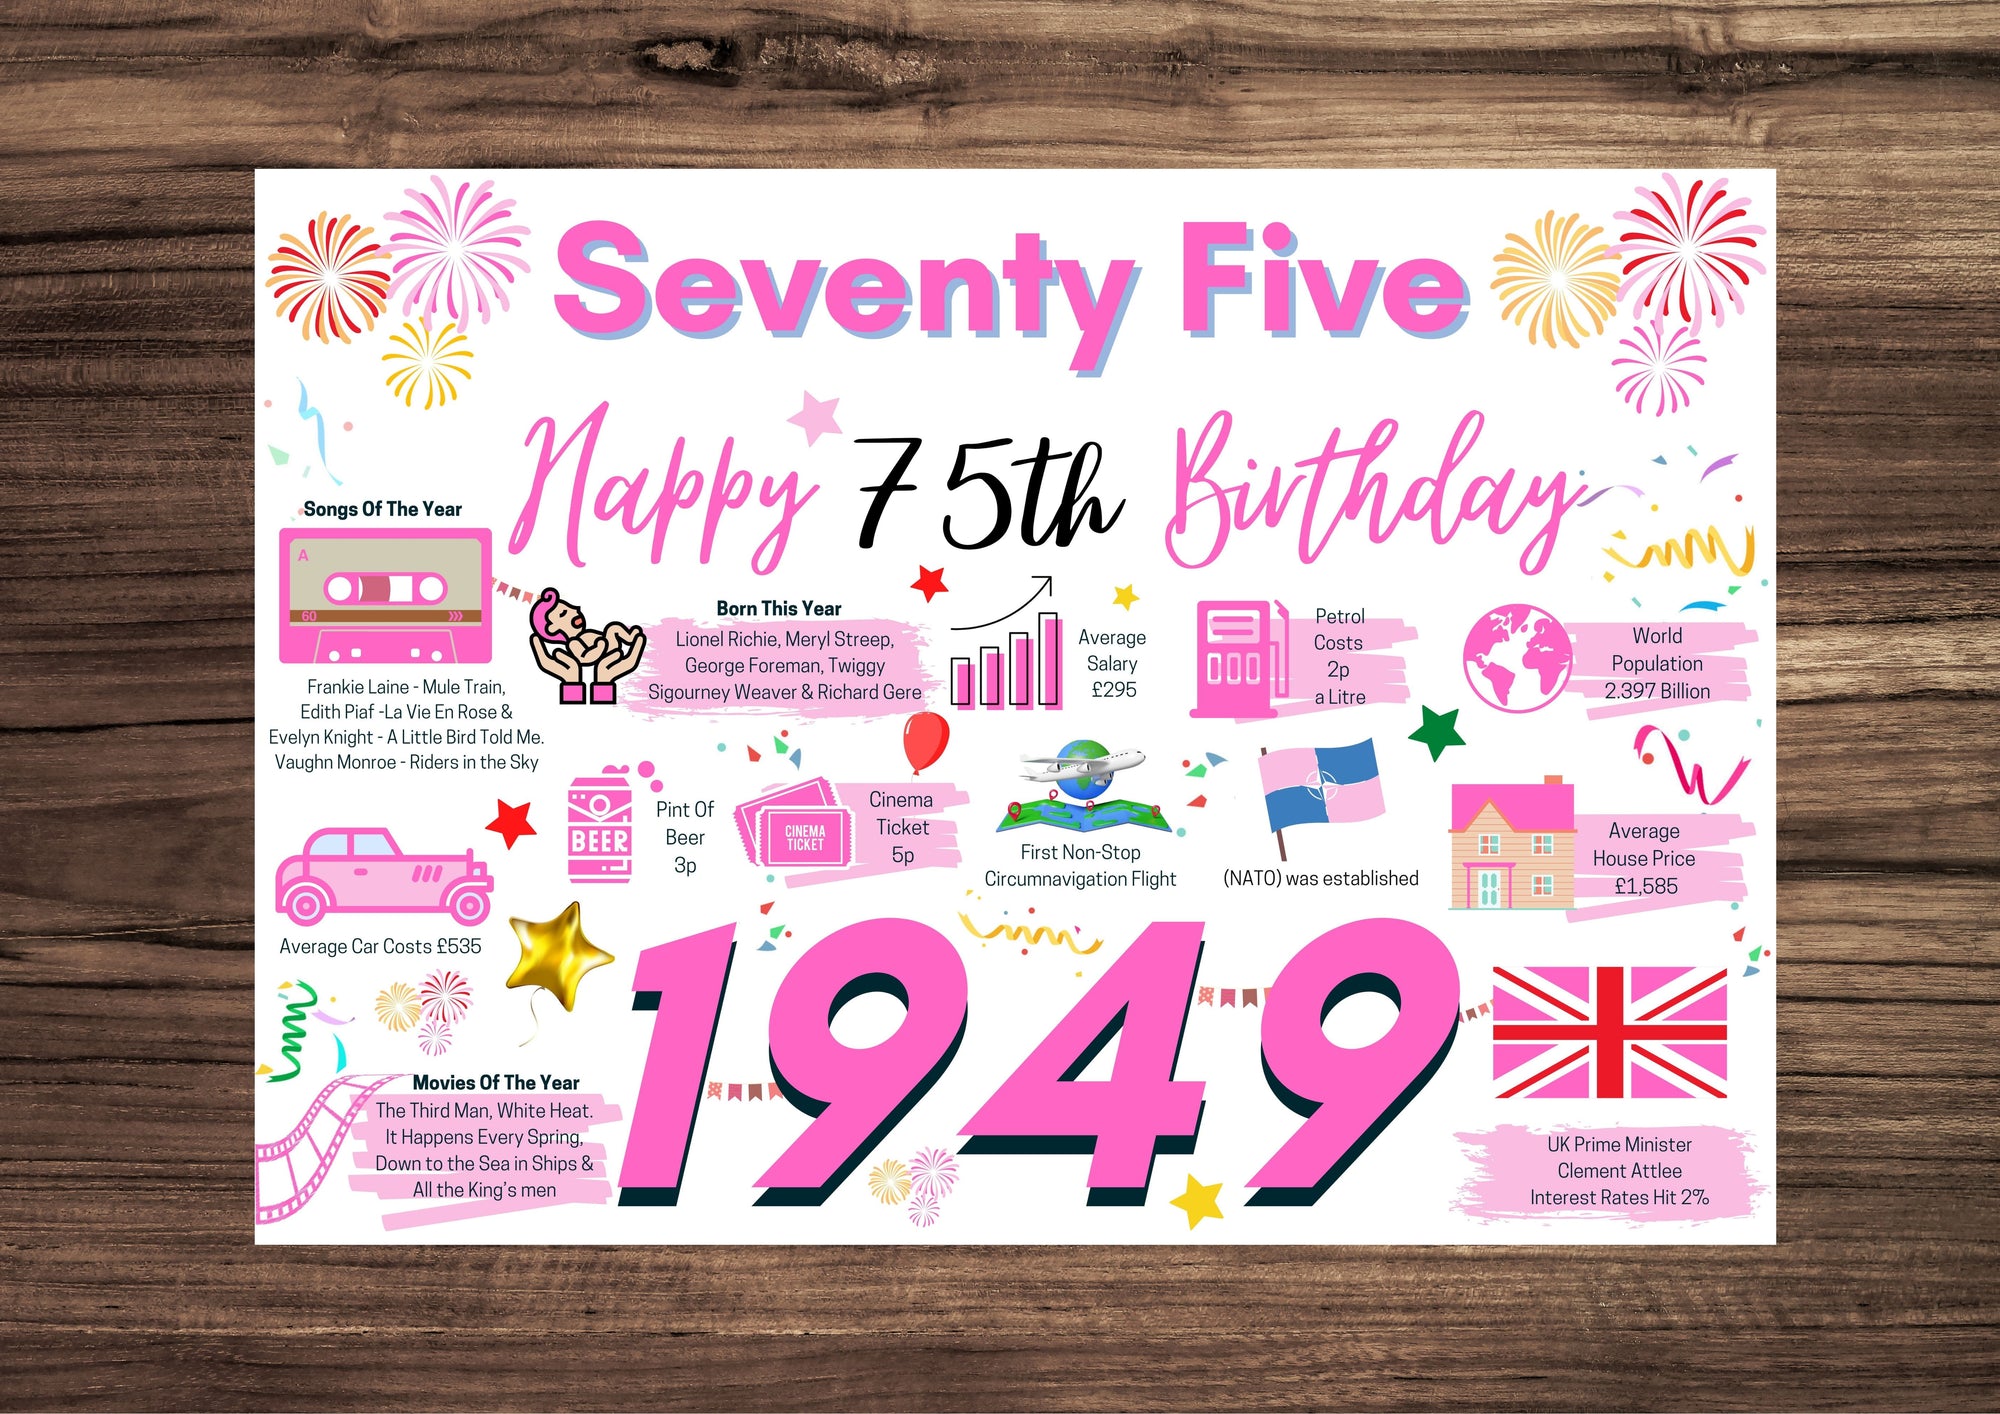 75th Birthday Card For Her, Birthday Card For Mum Sister Friend Woman, Seventy Five Happy 75th Greetings Card Born In 1949 75